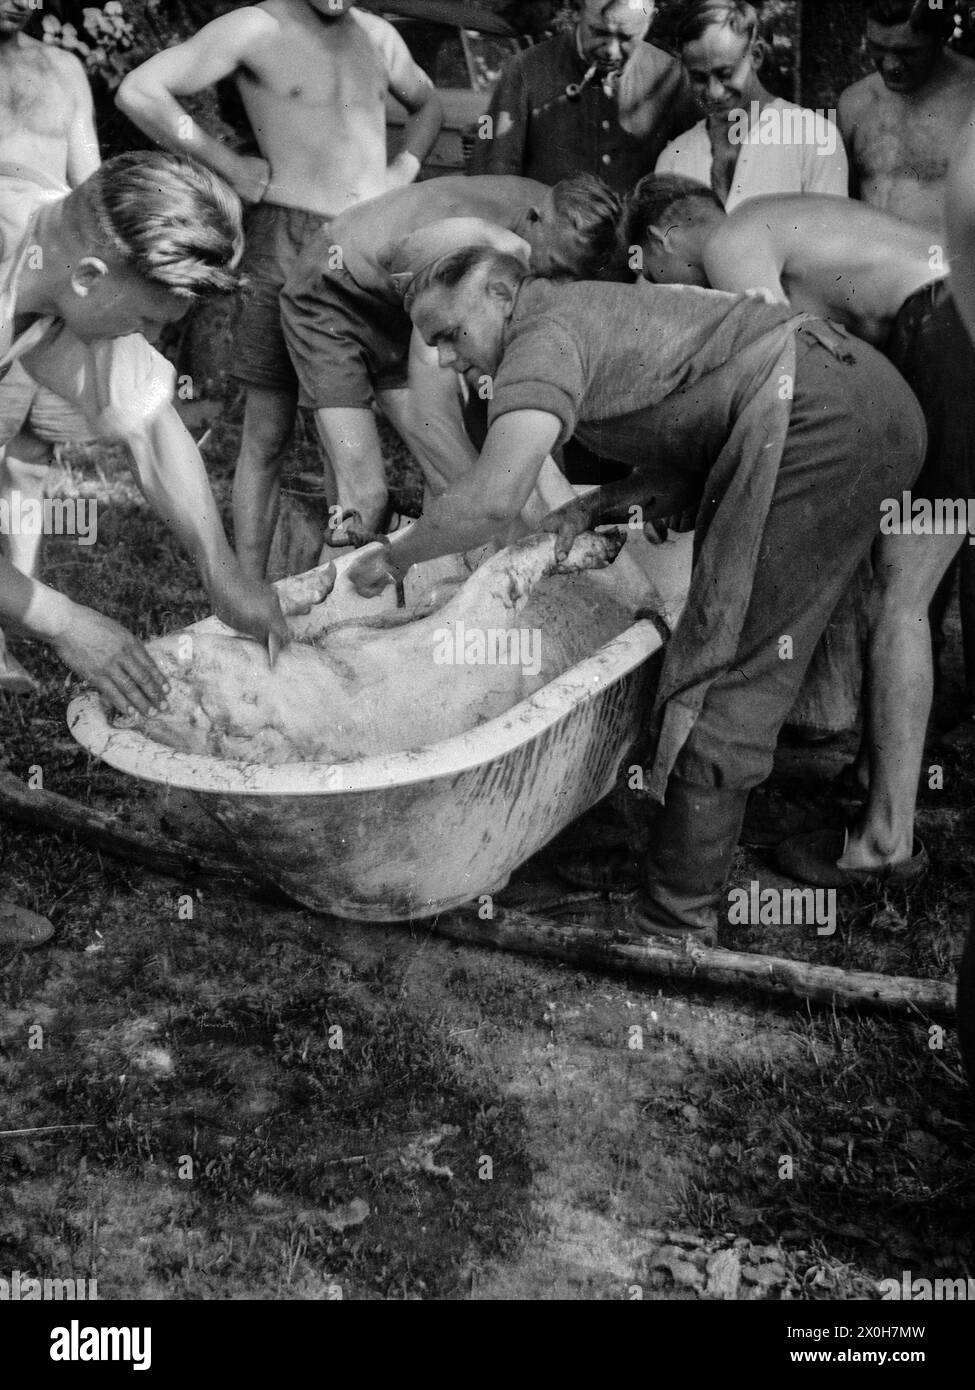 Soldiers of the Wehrmacht clean the bristles off a slaughtered pig in a bathtub. The picture was taken by a member of the Radfahrgrenadierregiment 2 / Radfahrsicherungsregiment 2, on the Eastern Front. Presumably during the advance in the summer of 1941 [automated translation] Stock Photo